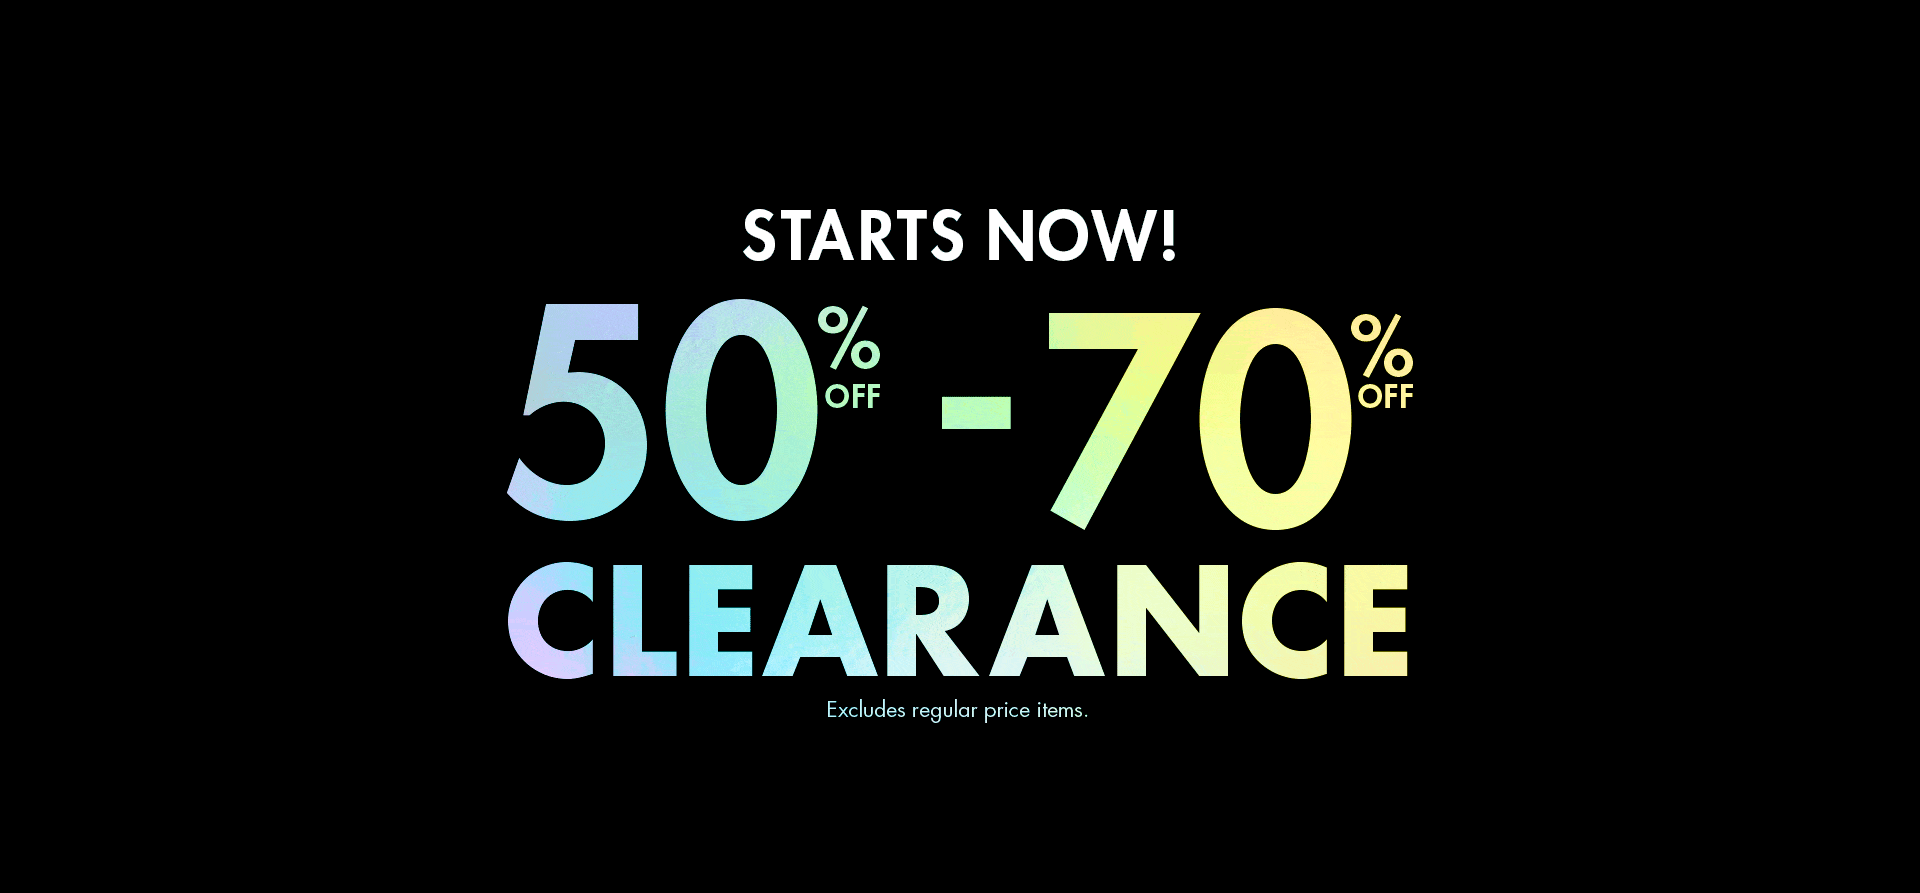 La Senza Canada Clearance Starts Now Save 50% to 70% Off! - Canadian  Freebies, Coupons, Deals, Bargains, Flyers, Contests Canada Canadian  Freebies, Coupons, Deals, Bargains, Flyers, Contests Canada